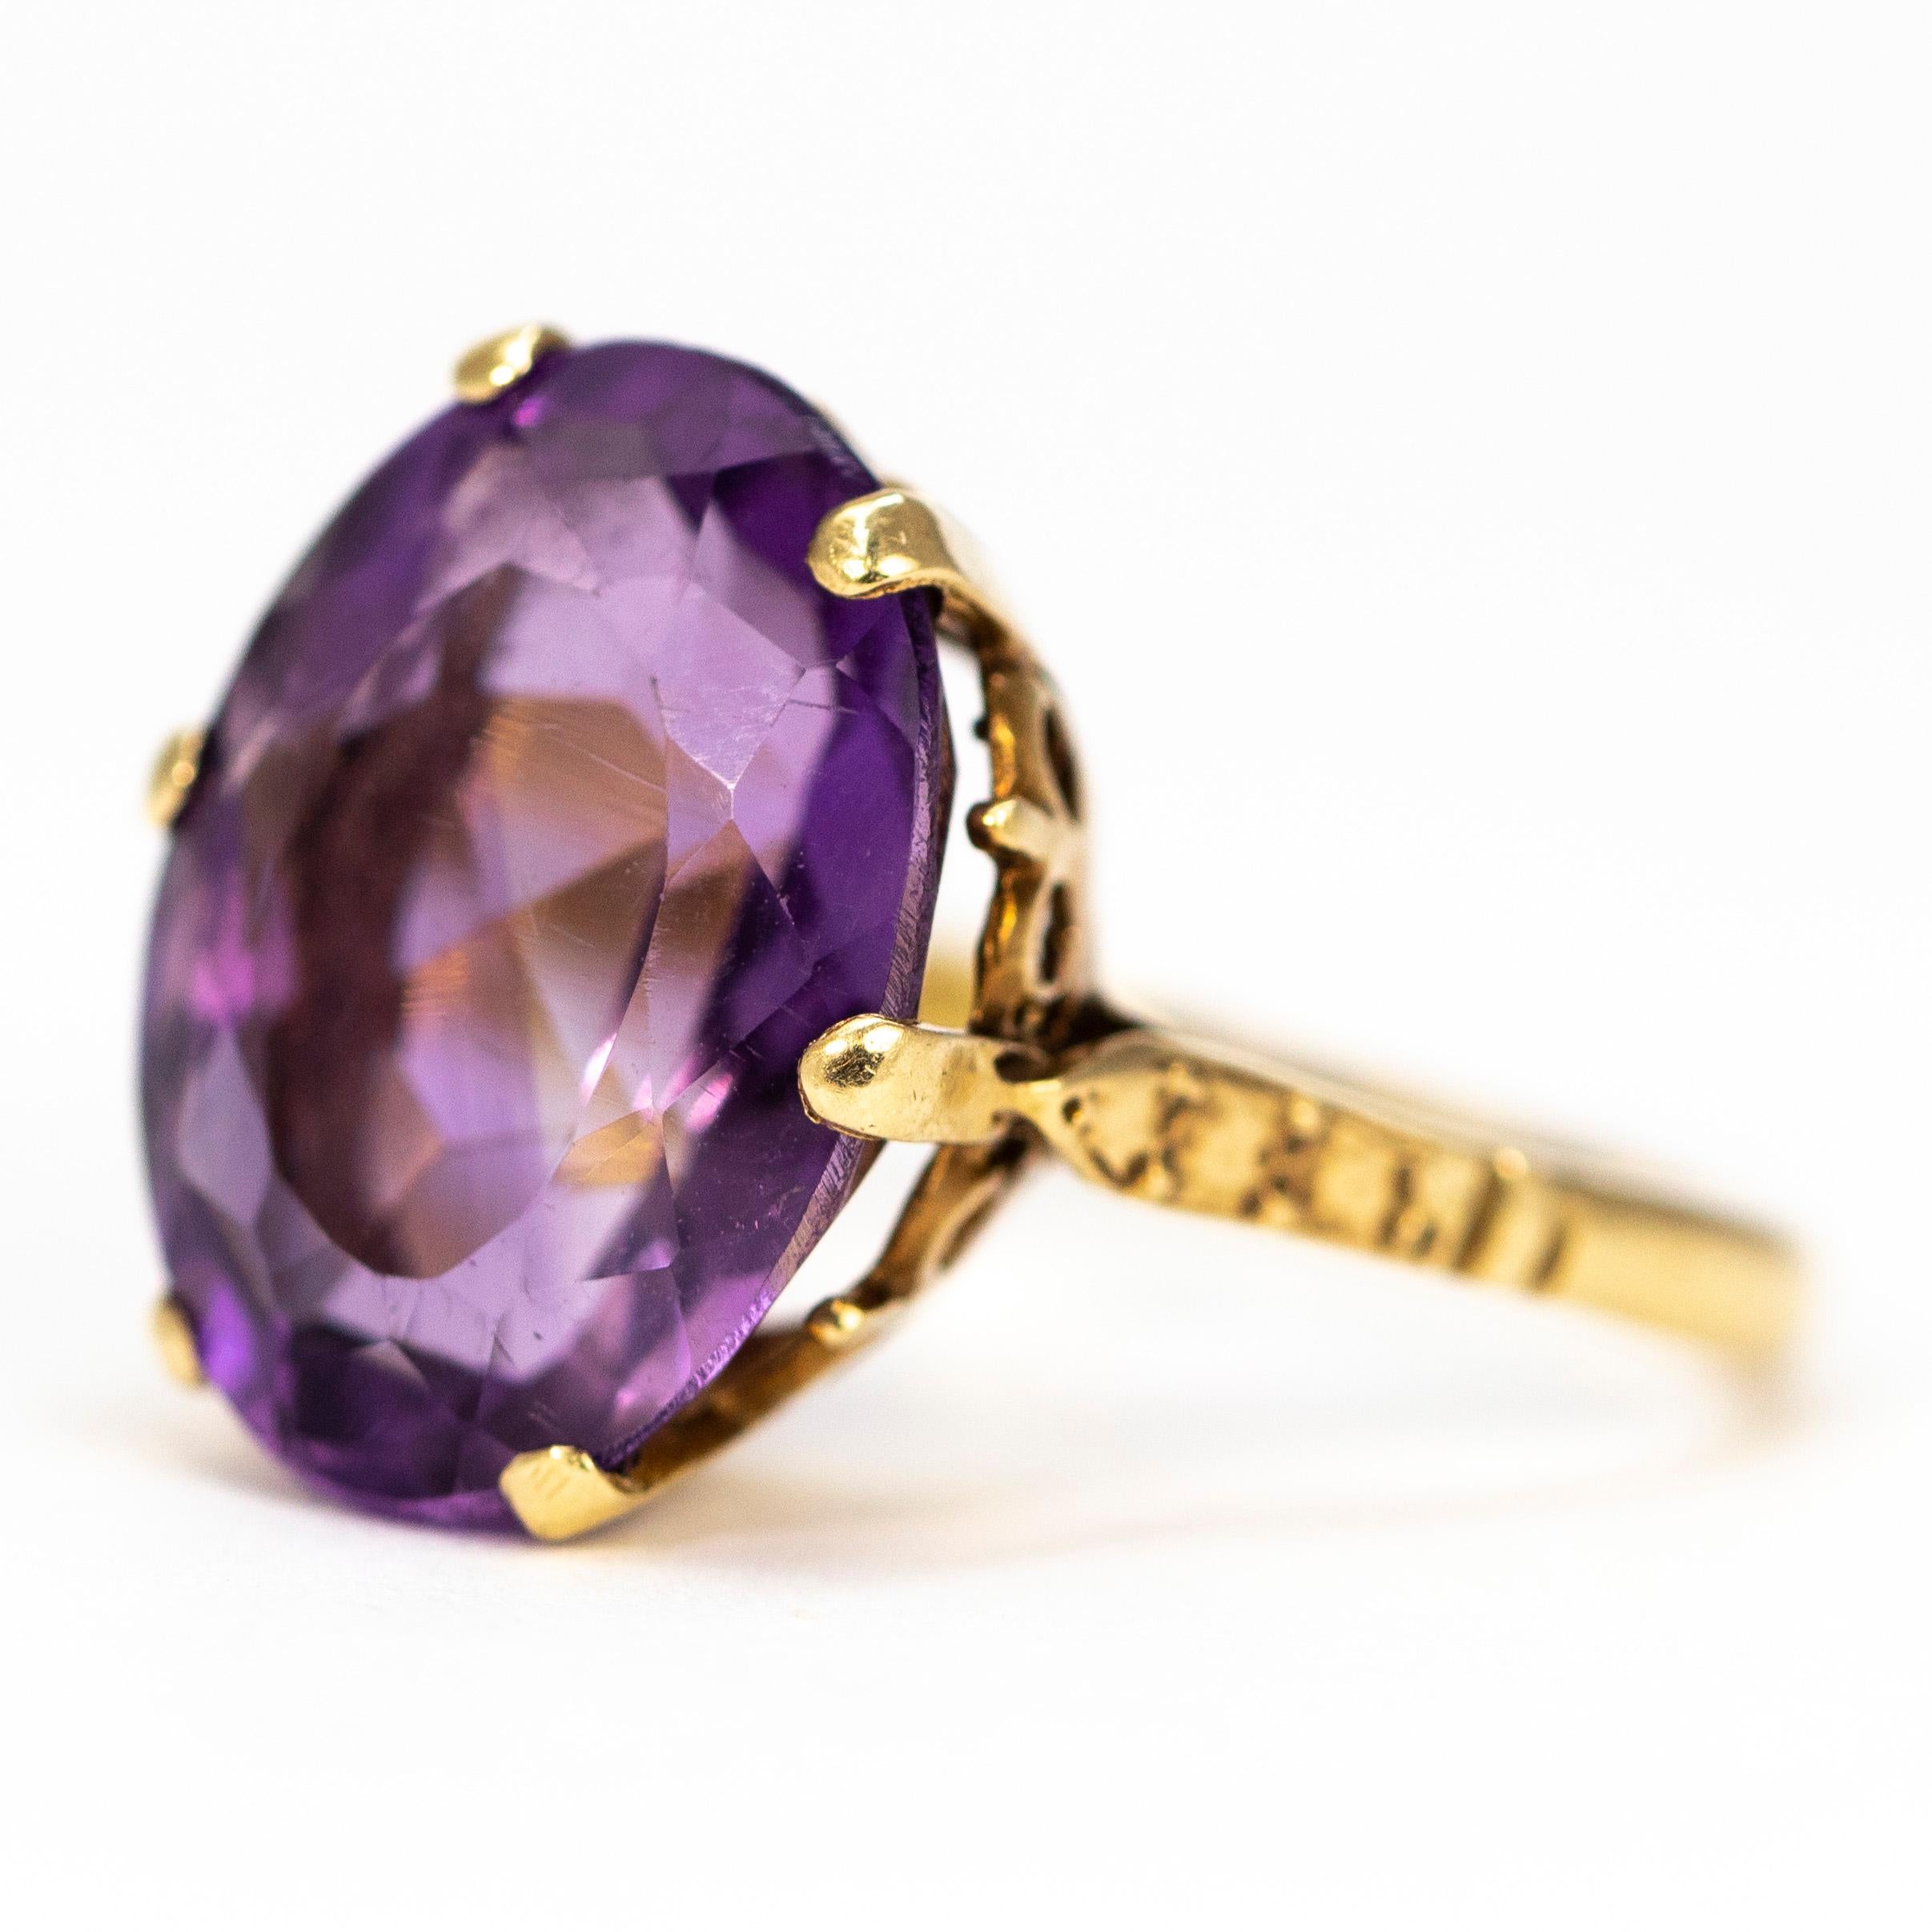 The oval stone set simply in this ring using a simple claw setting. The Amethyst is a deep purple colour and is perched upon a gorgeous open gallery with great detail. Made in Birmingham, England. 

Ring Size: N or 6 3/4 
Stone Dimensions: 16x 13mm